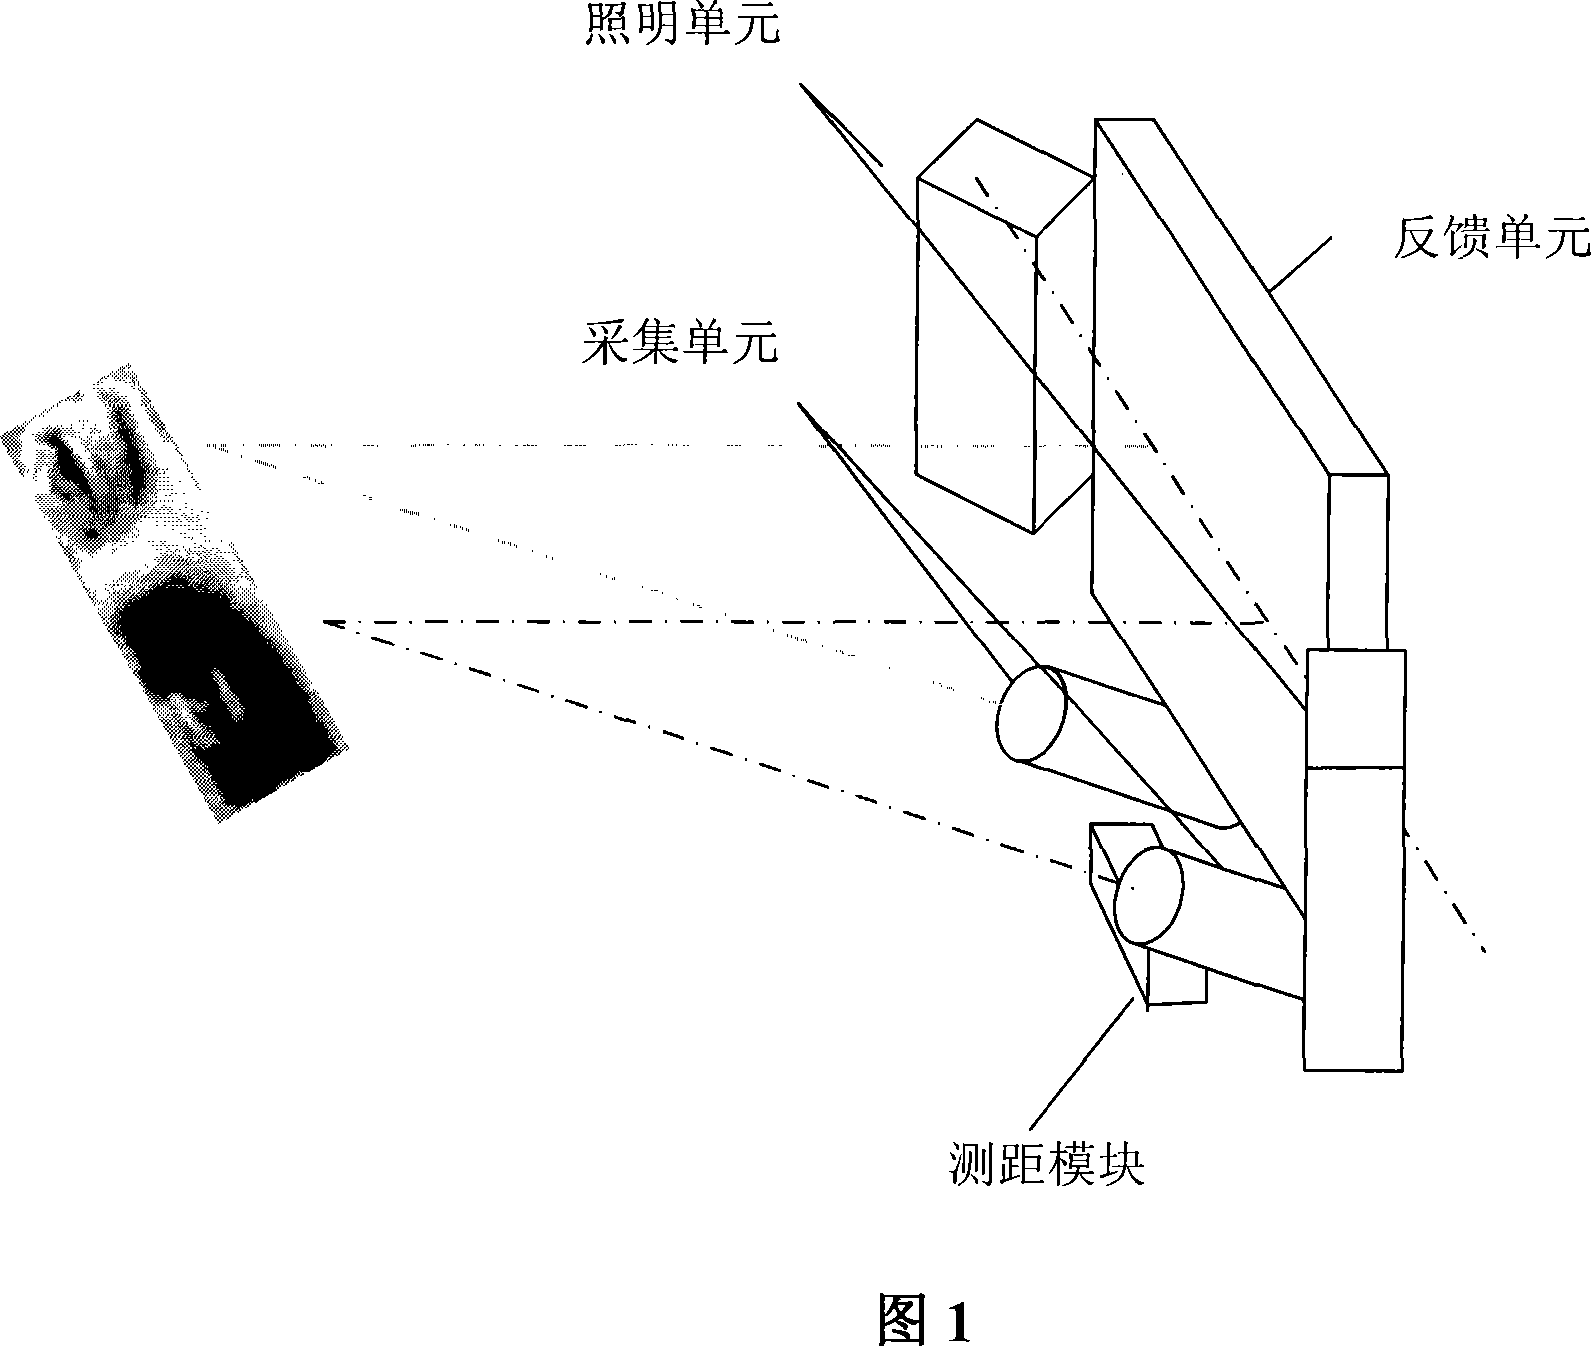 Multiple iris collecting device using active vision feedback